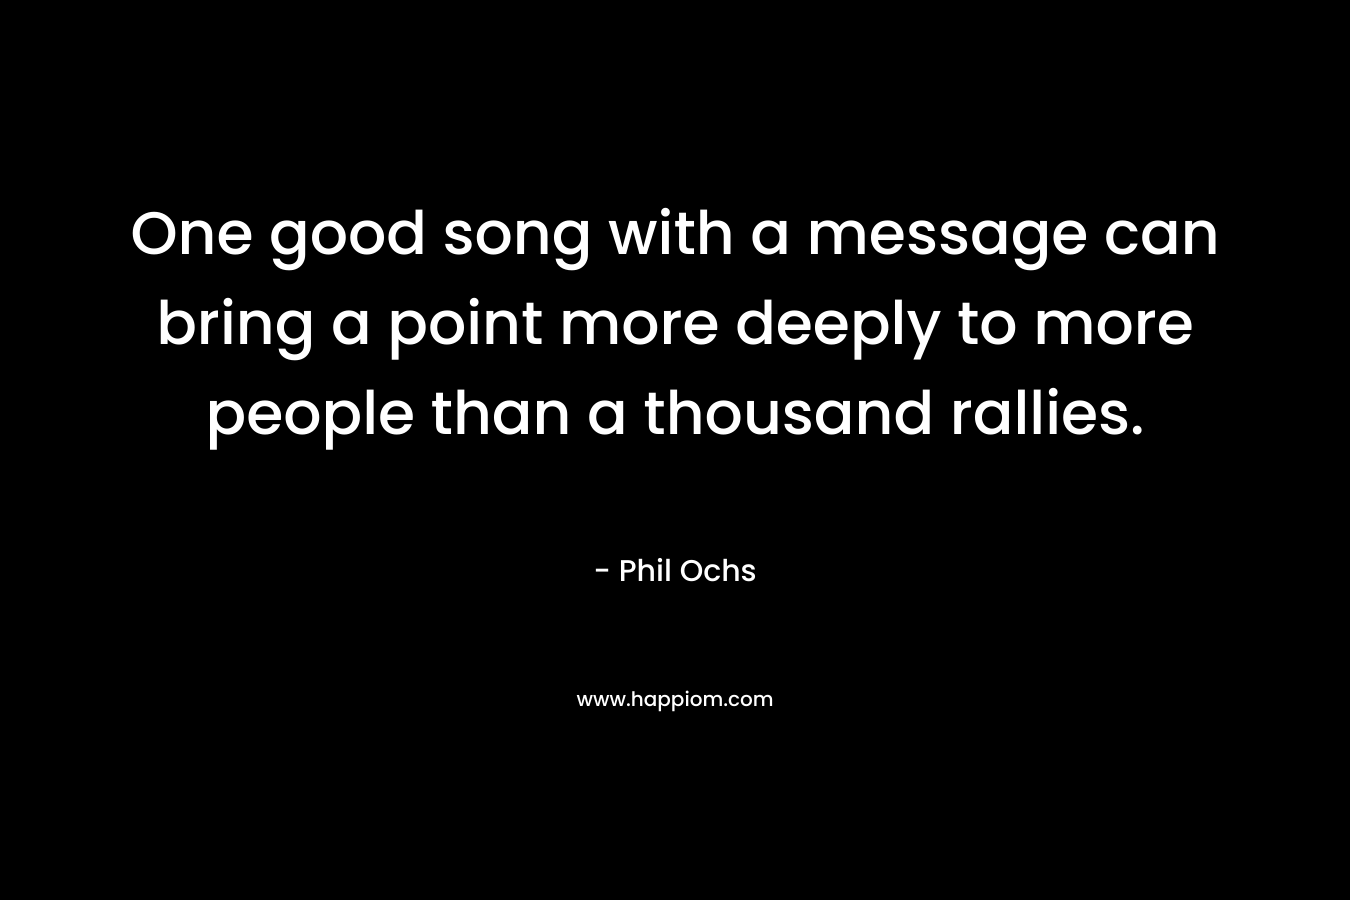 One good song with a message can bring a point more deeply to more people than a thousand rallies.